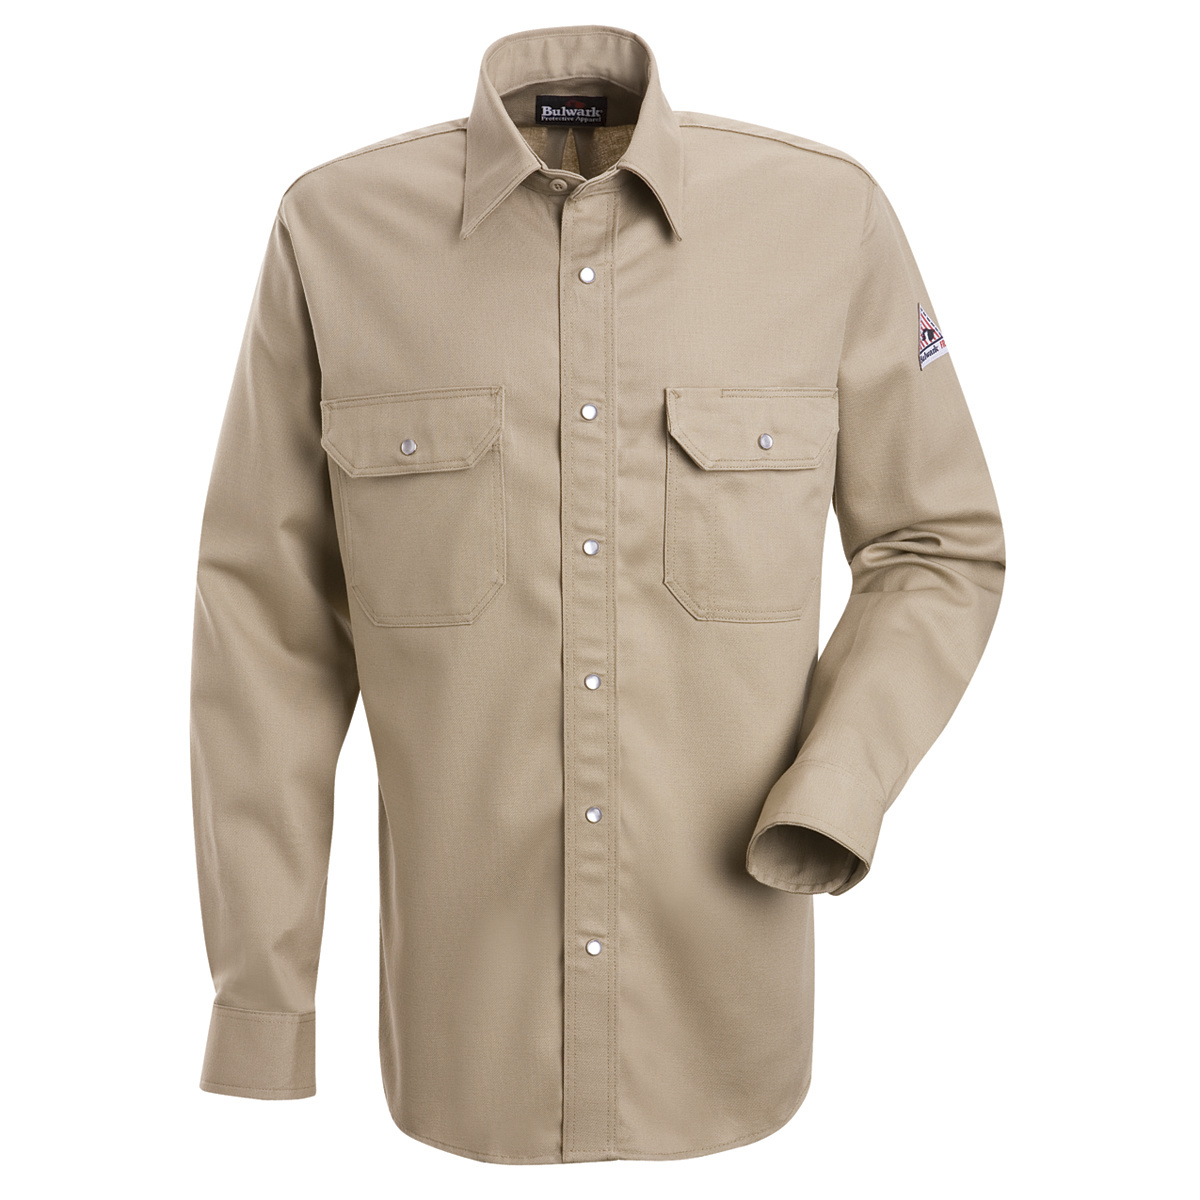 Bulwark® X-Large Tall Tan EXCEL FR® Cotton Flame Resistant Uniform Shirt With Snap Front Closure